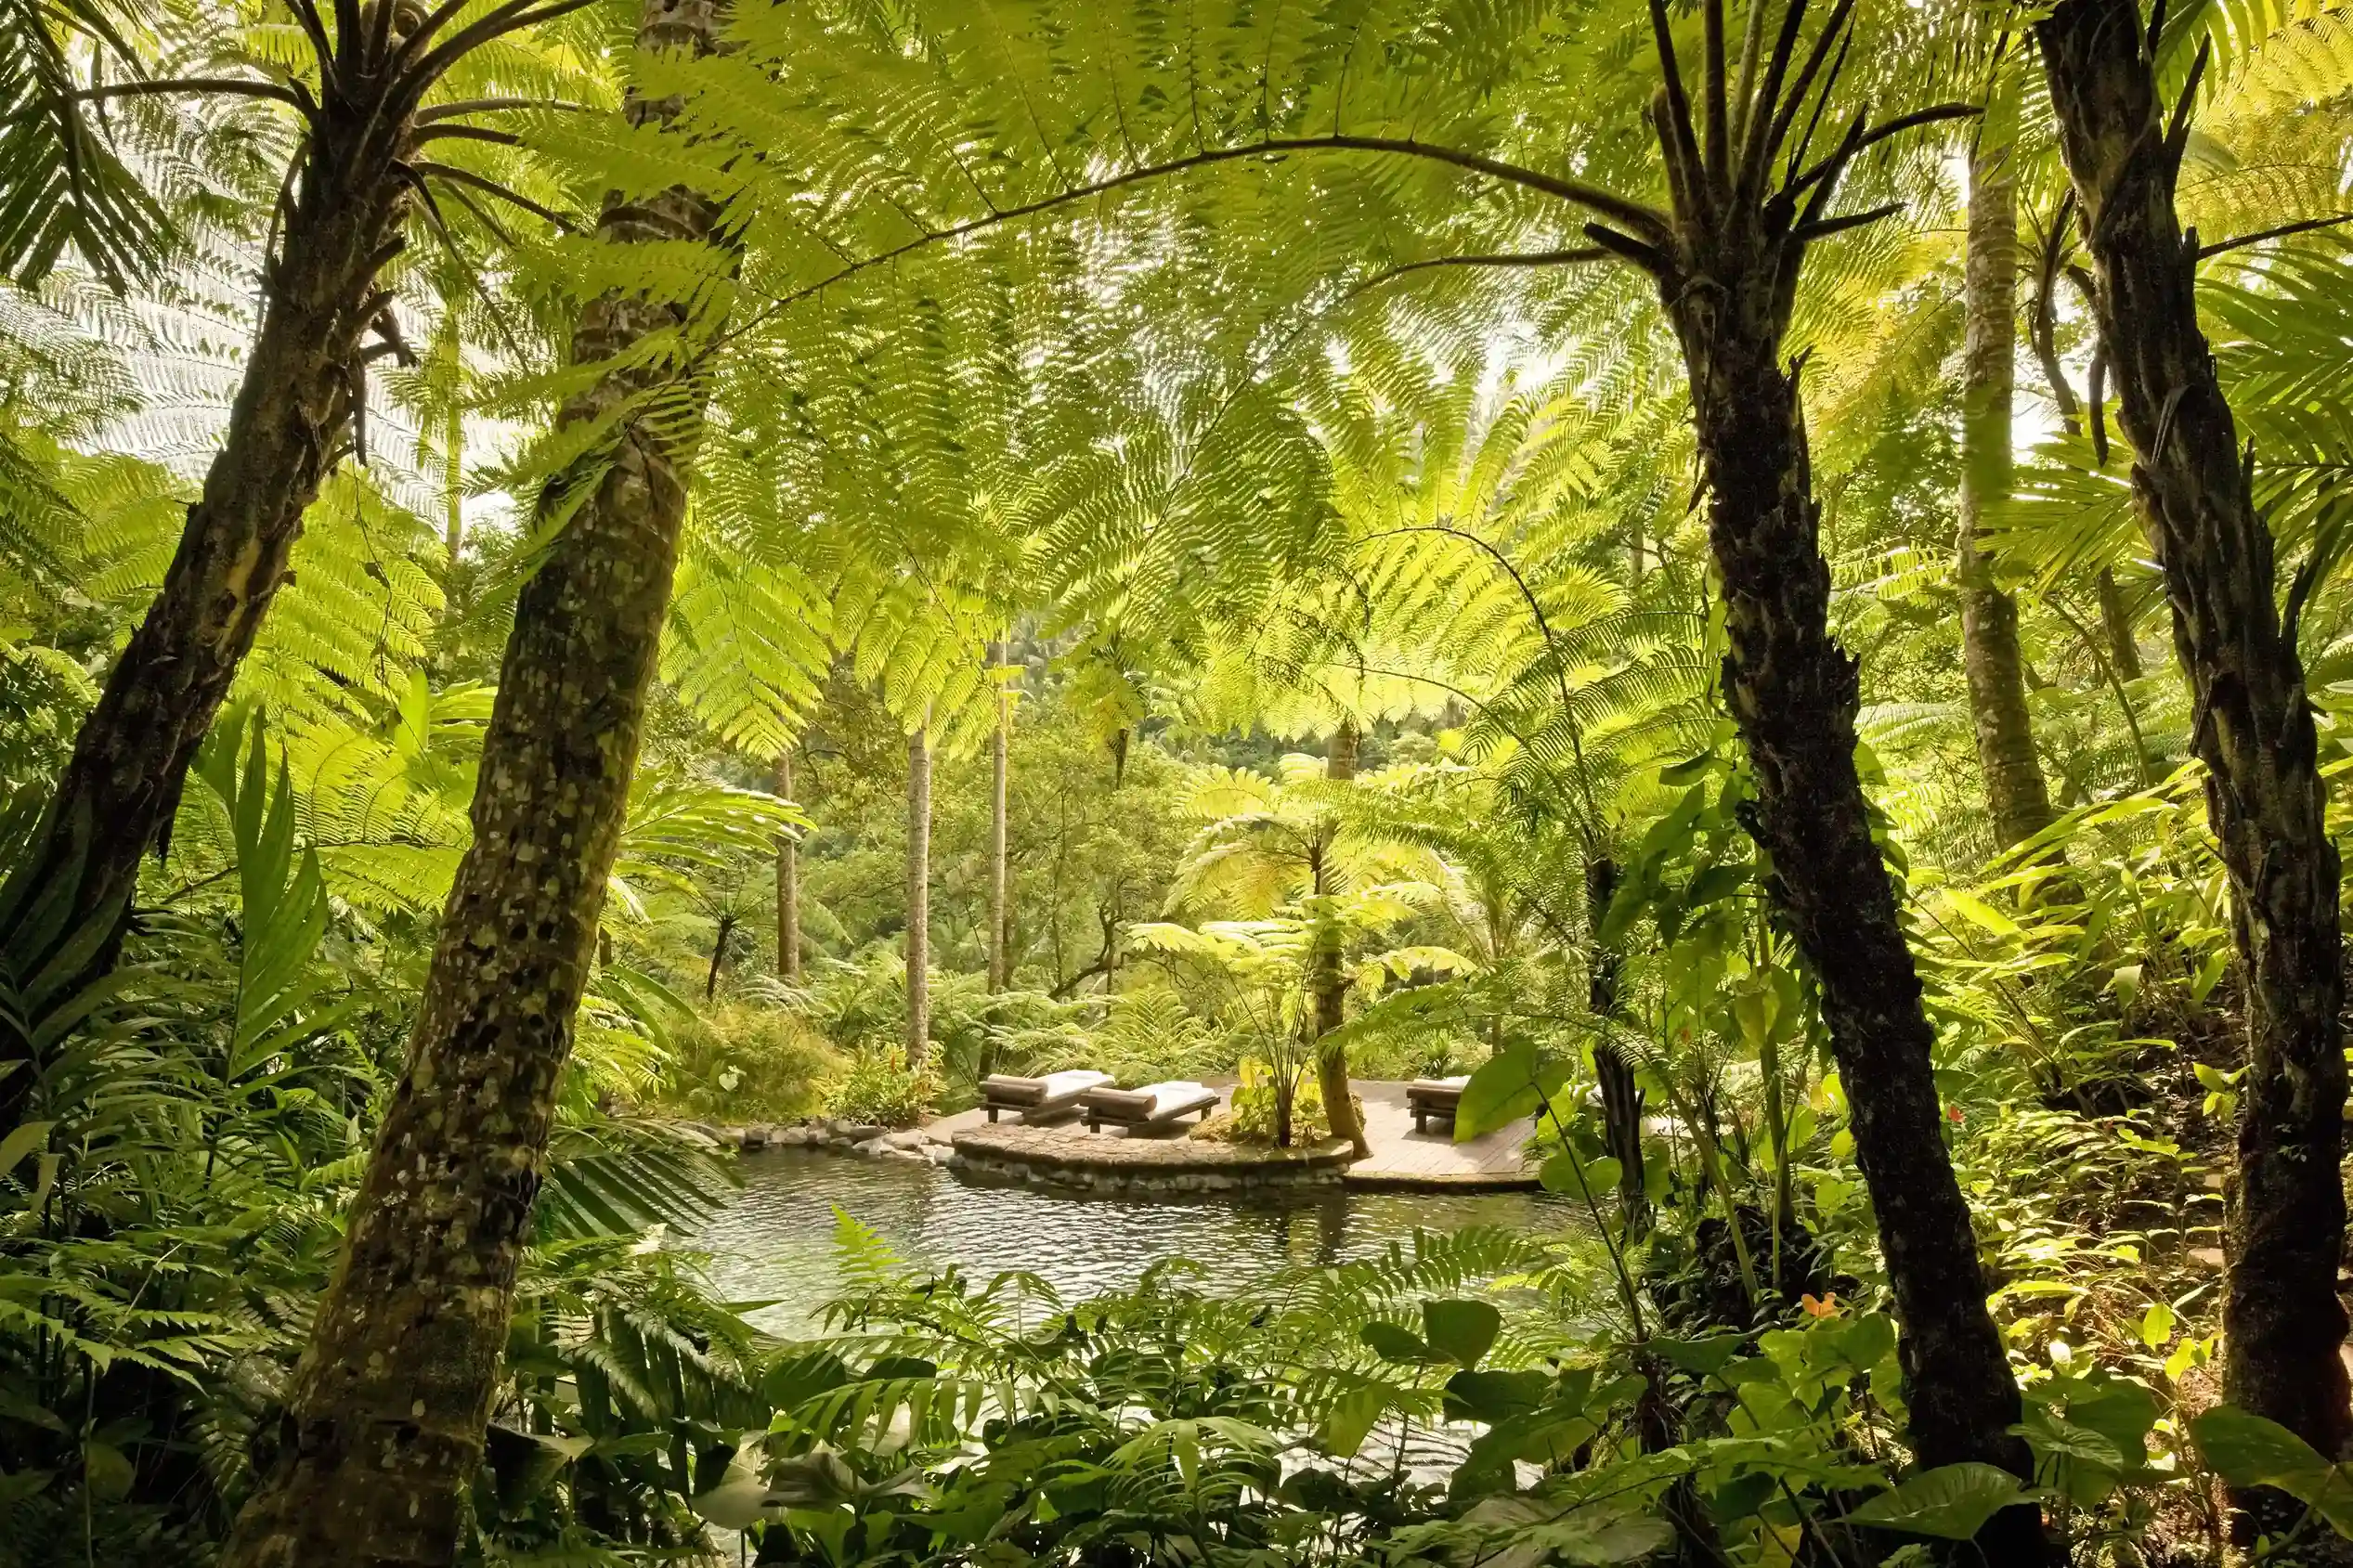 The lush garden scene at Como Shambhala Estate, a wellness resort in Bali, showcases a tranquil pond surrounded by dense, vibrant greenery and tall tree ferns.